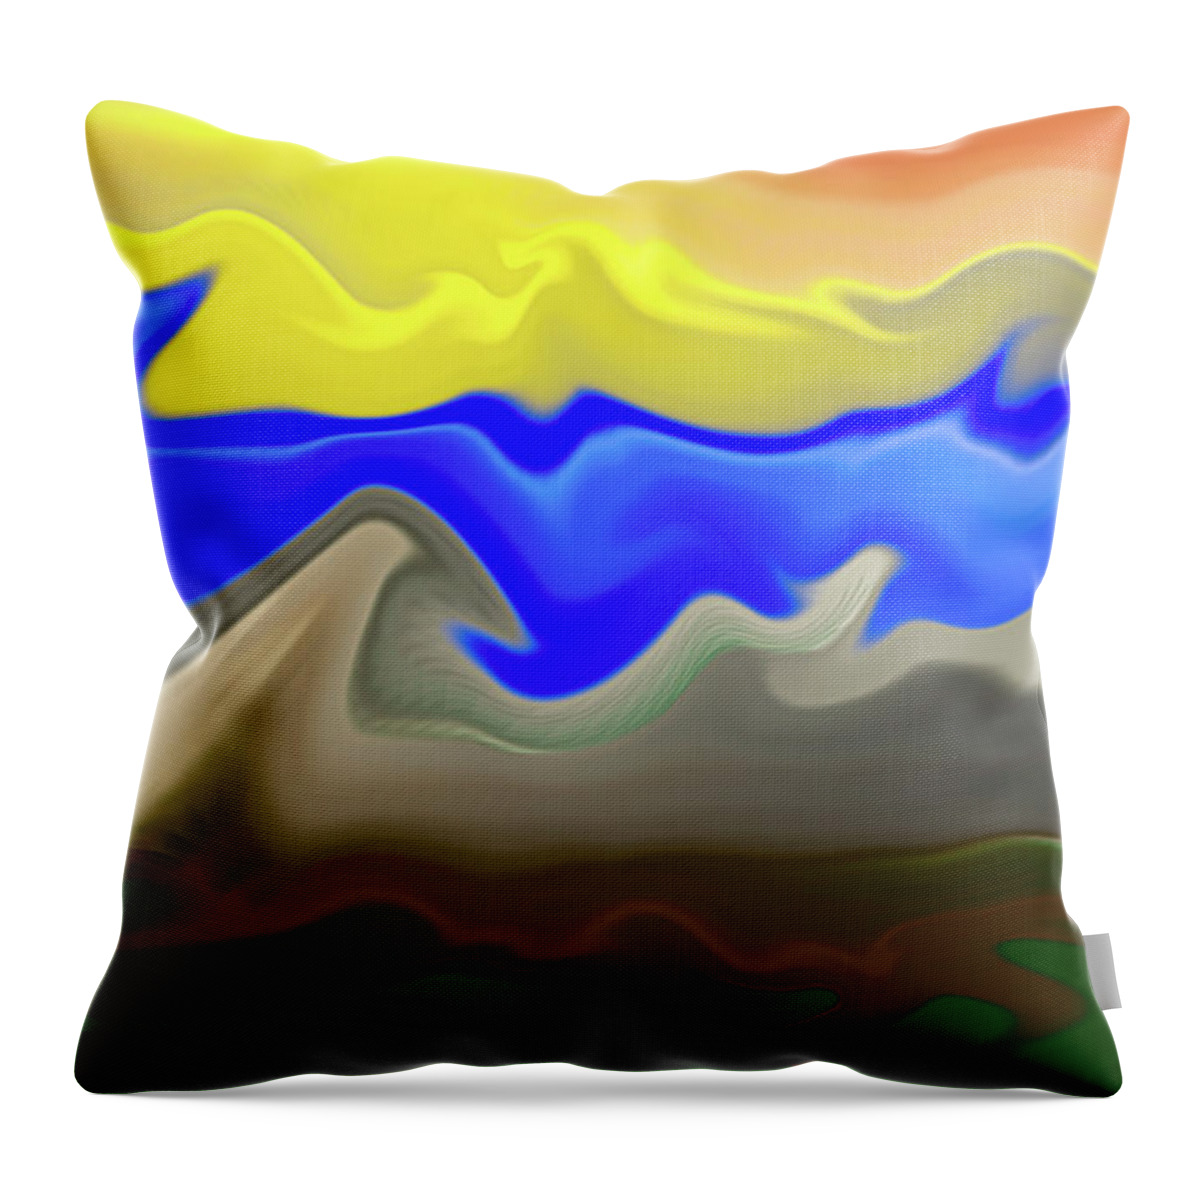 Oil Throw Pillow featuring the digital art The deformed hills by Paulo Viana